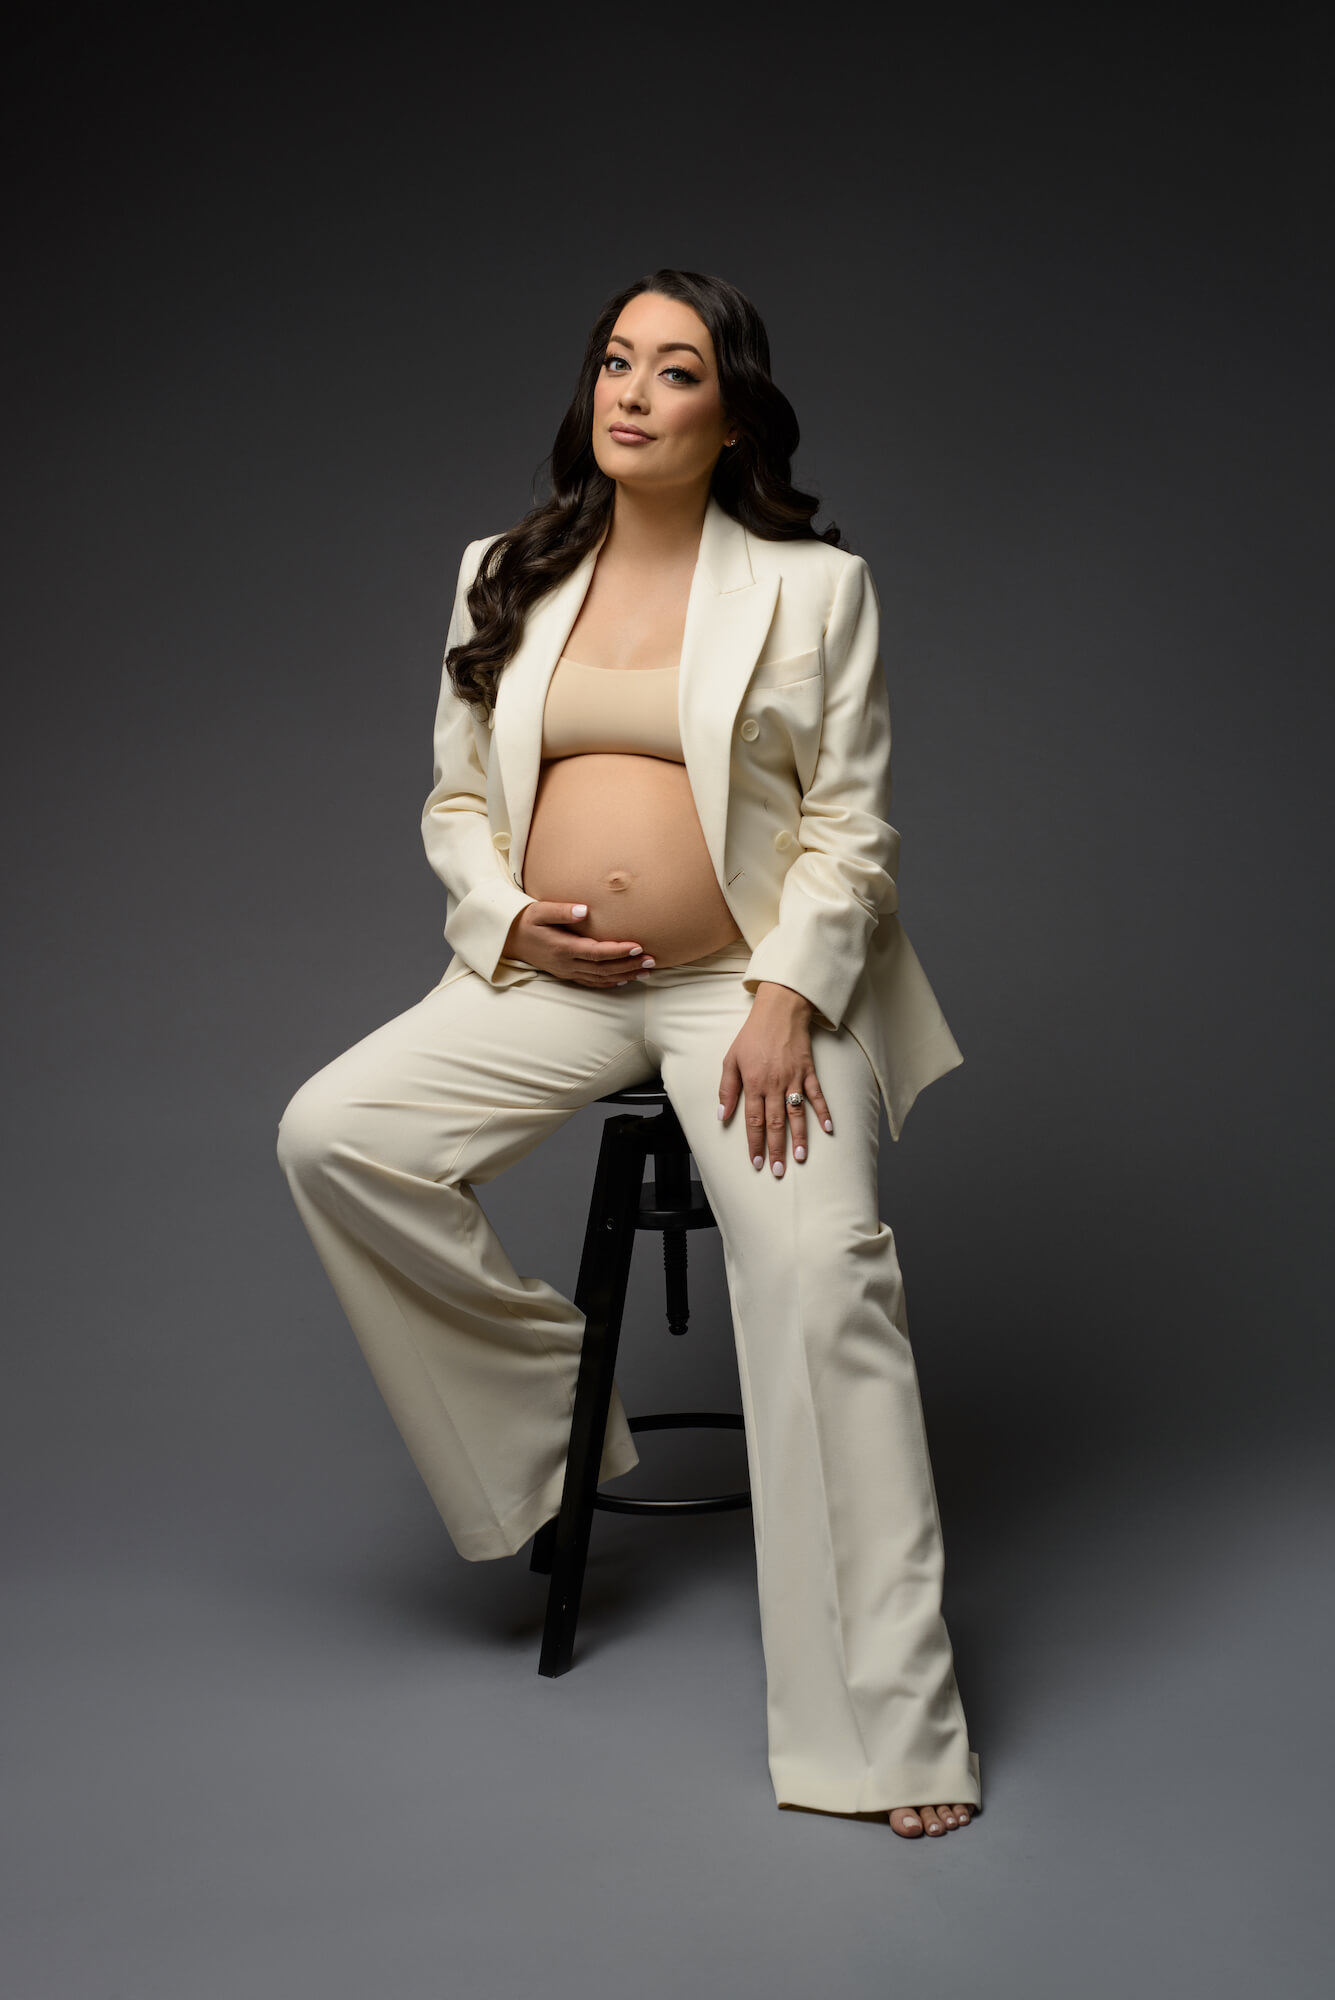 Classy maternity portrait of brunette sitting on stool wearing white business suit with the coat open to show off the baby bump. 